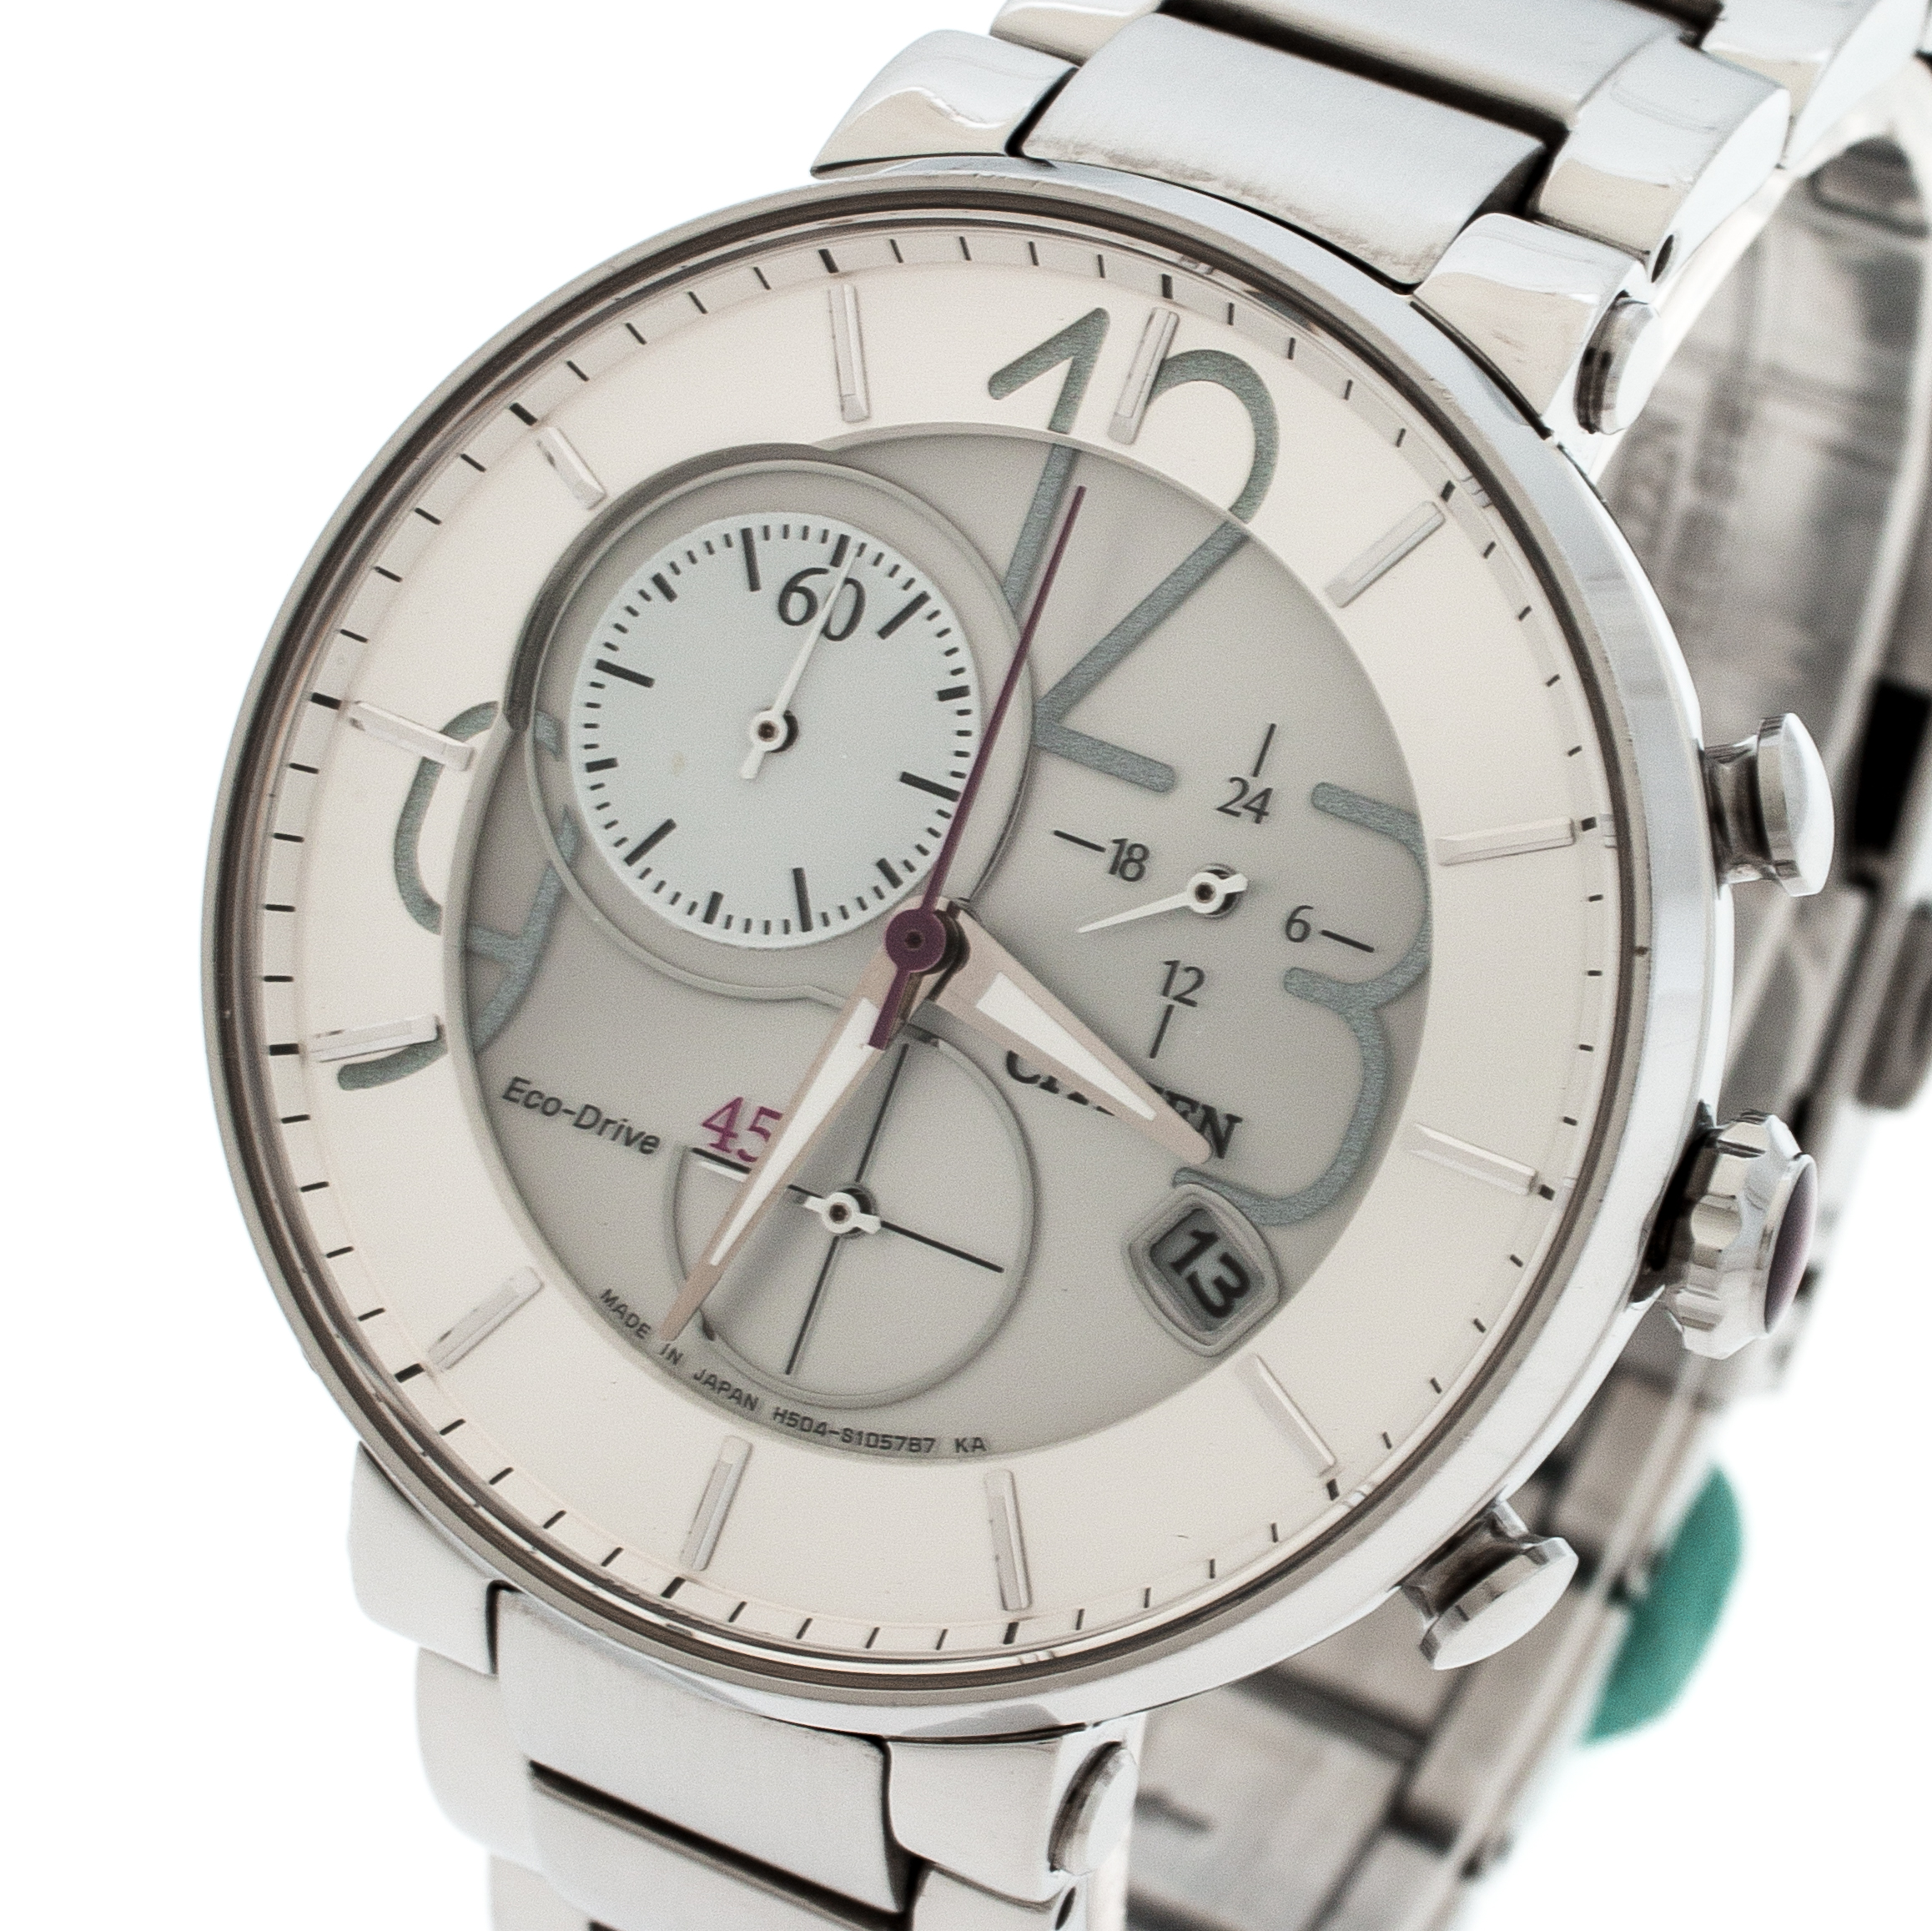 

Citizen Silver Stainless Steel Eco-Drive Chronograph GN-4N-S→9 Women's Wristwatch